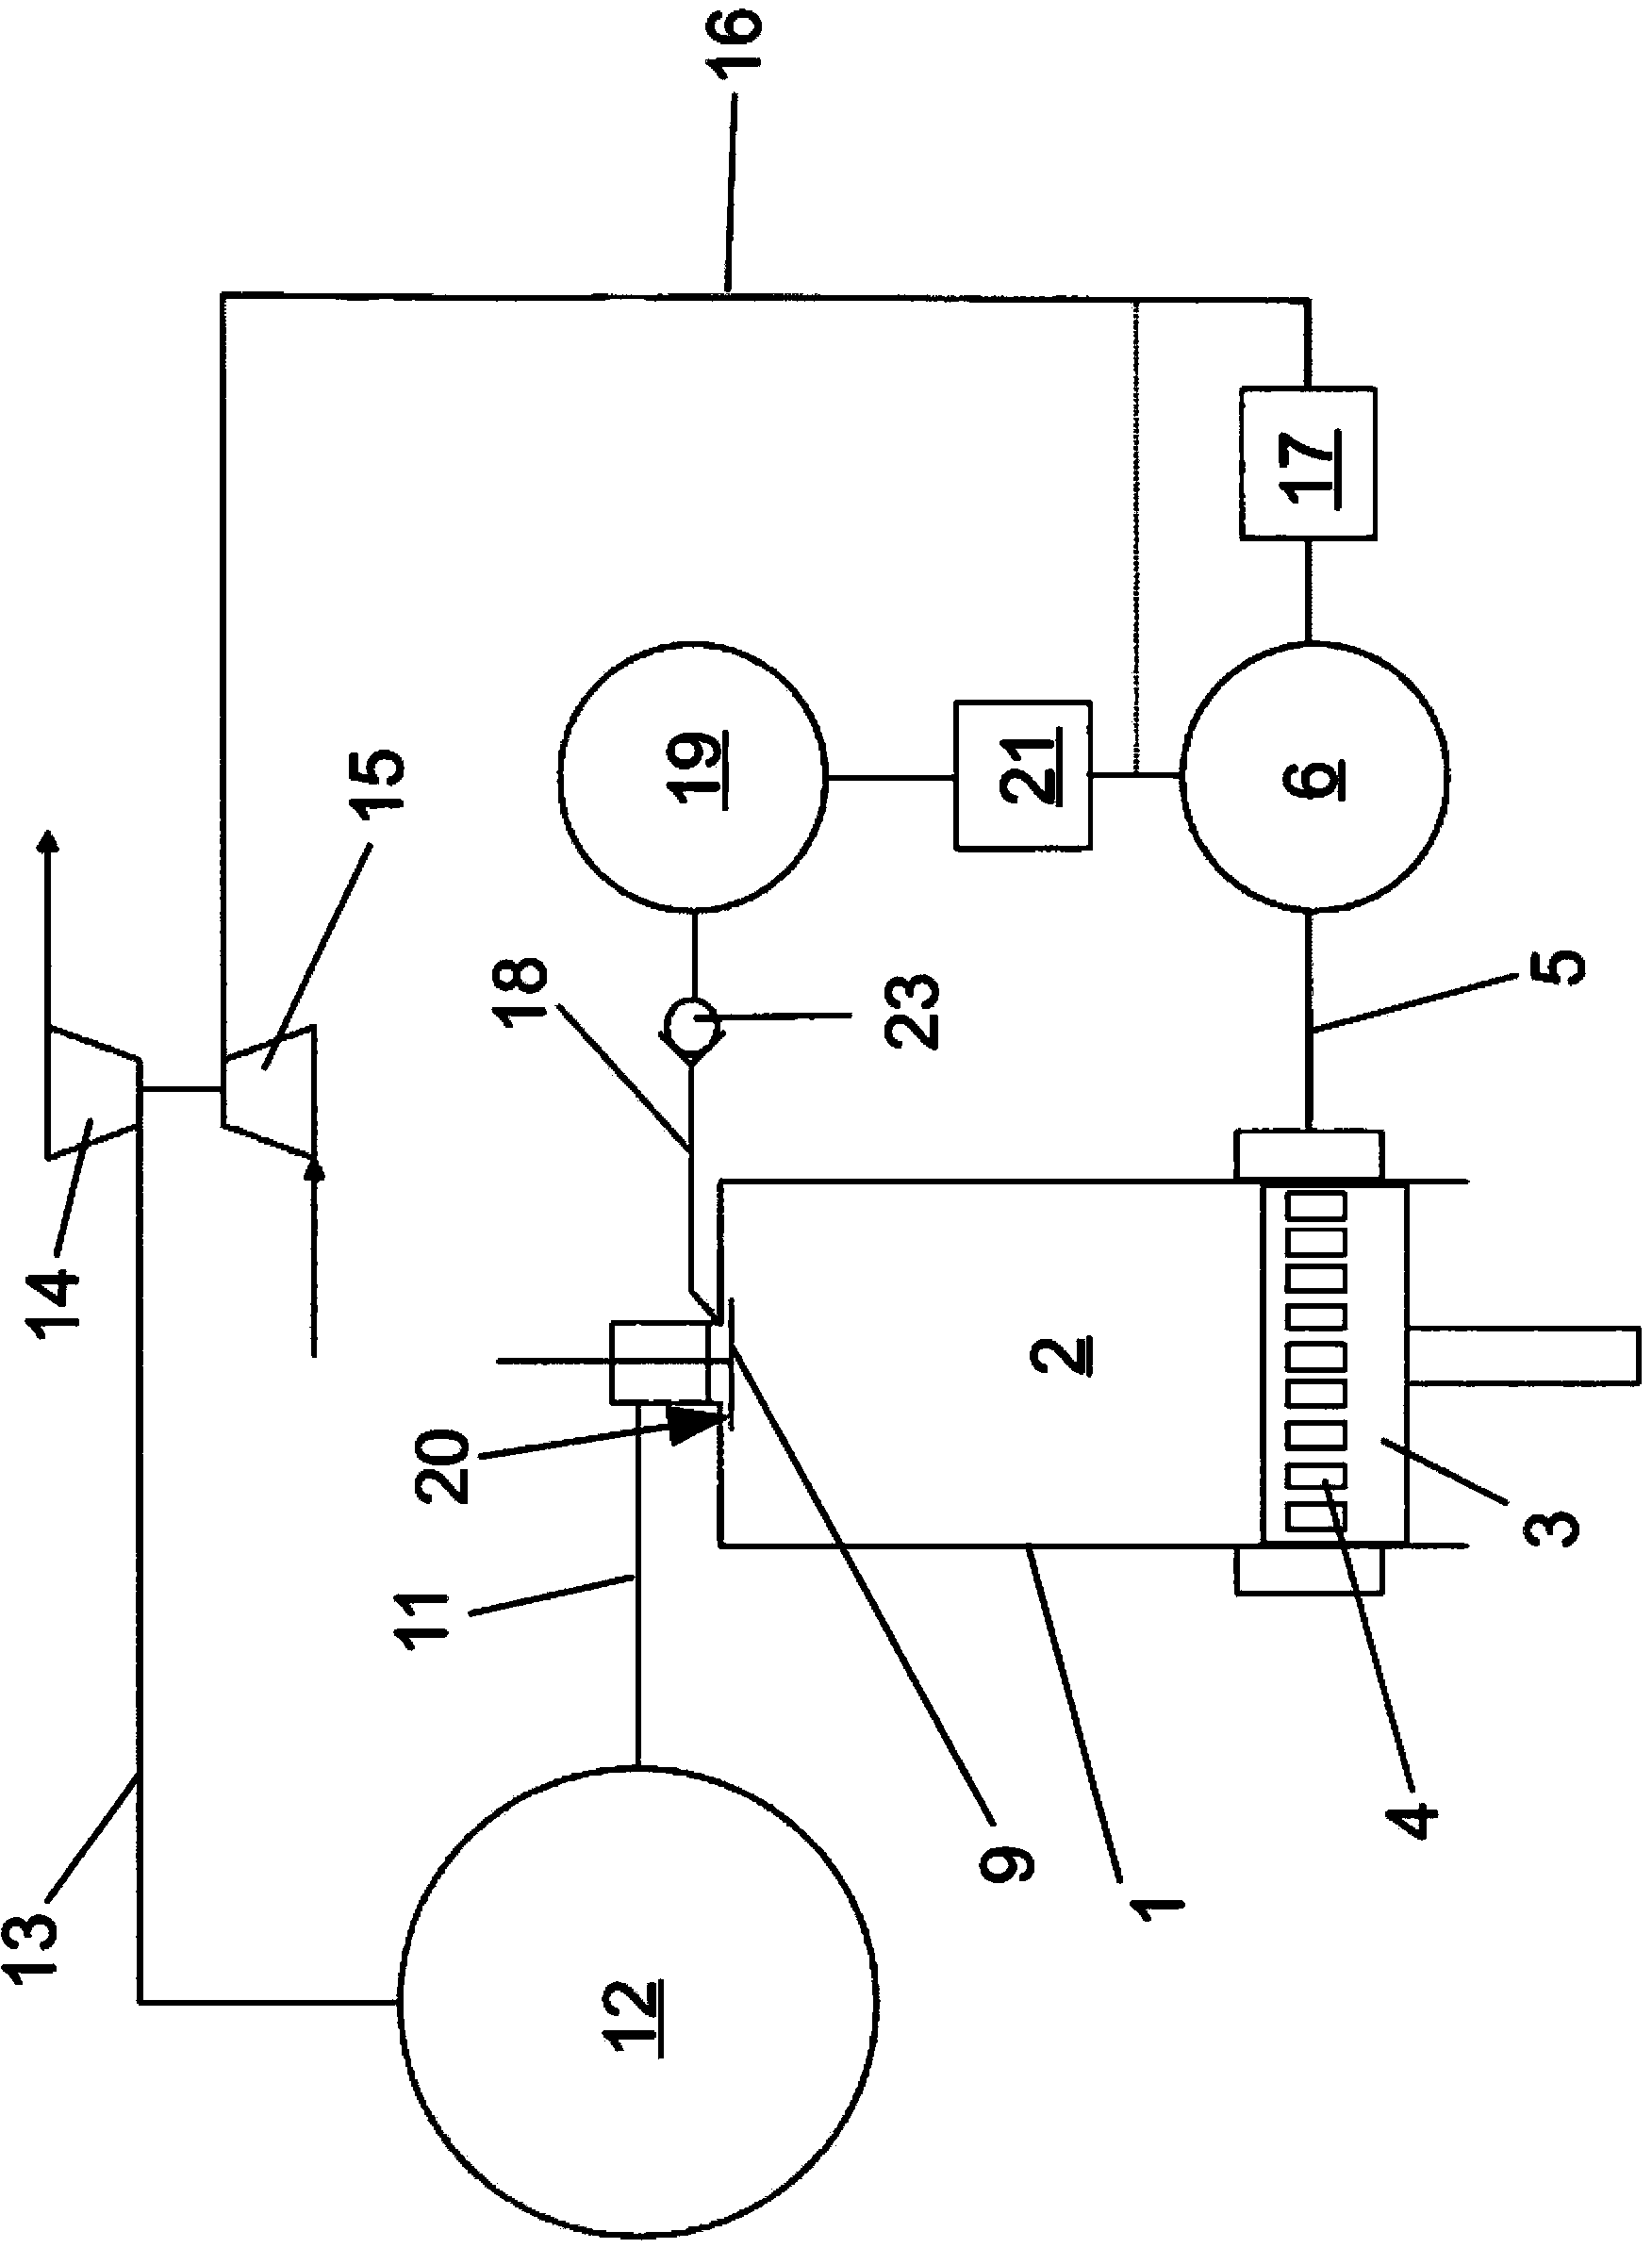 Internal combustion engine, exhaust valve and cylinder head therefor, and production, operation and use of an internal combustion engine